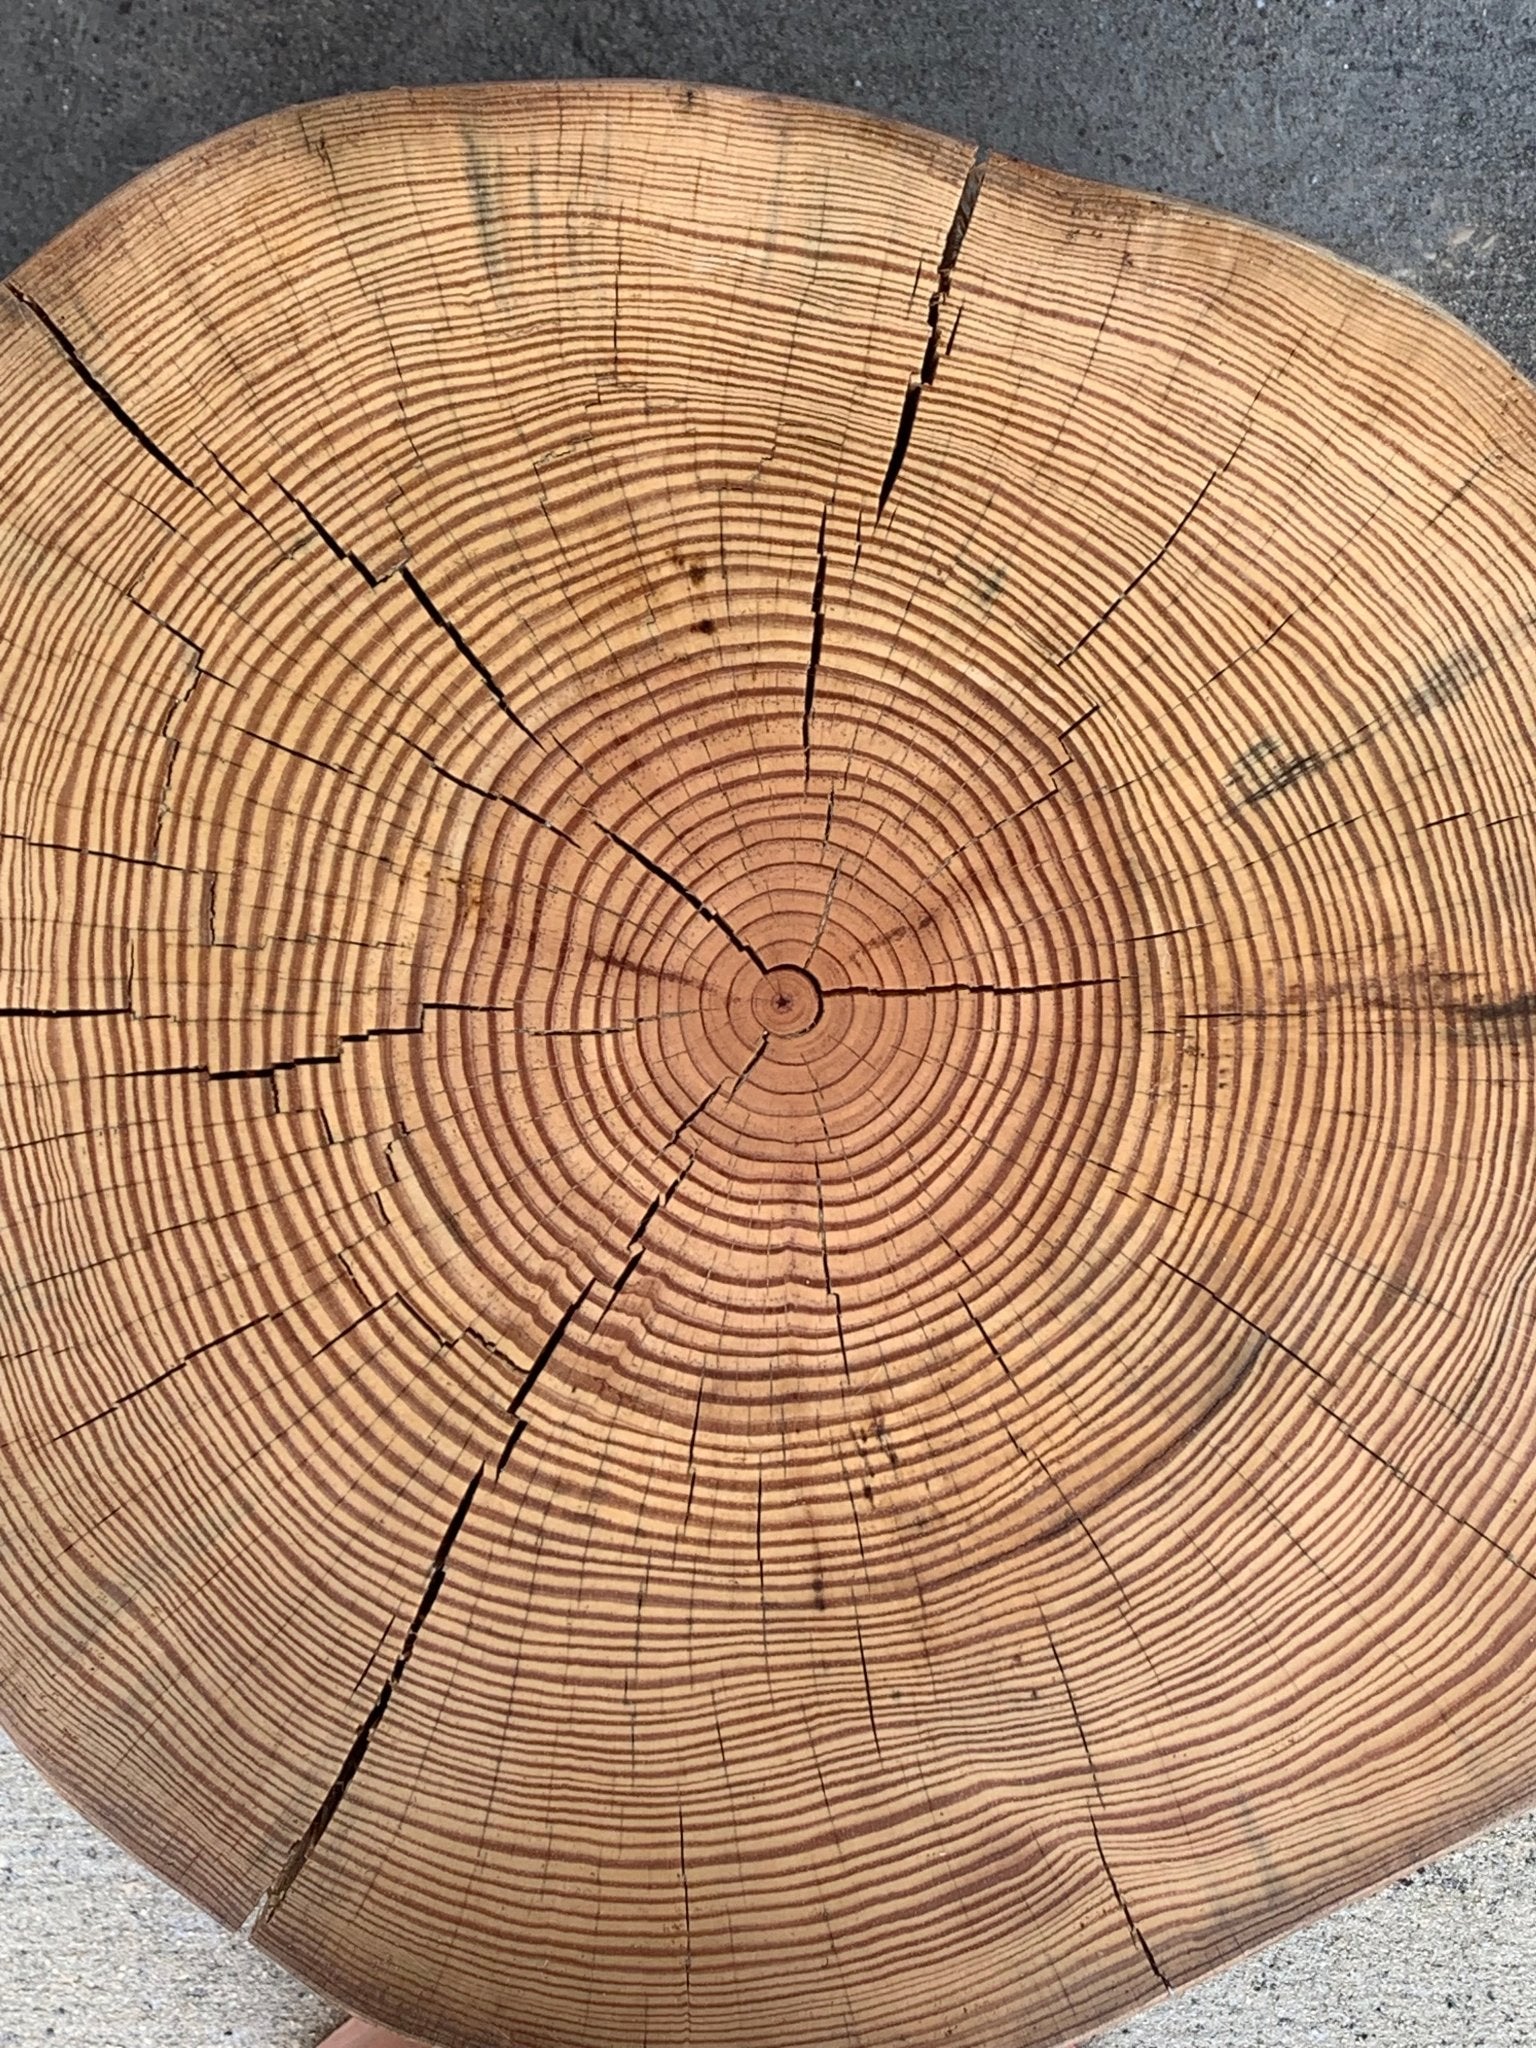 HOW TO COUNT THE RINGS OF A TREE - Alabama Sawyer